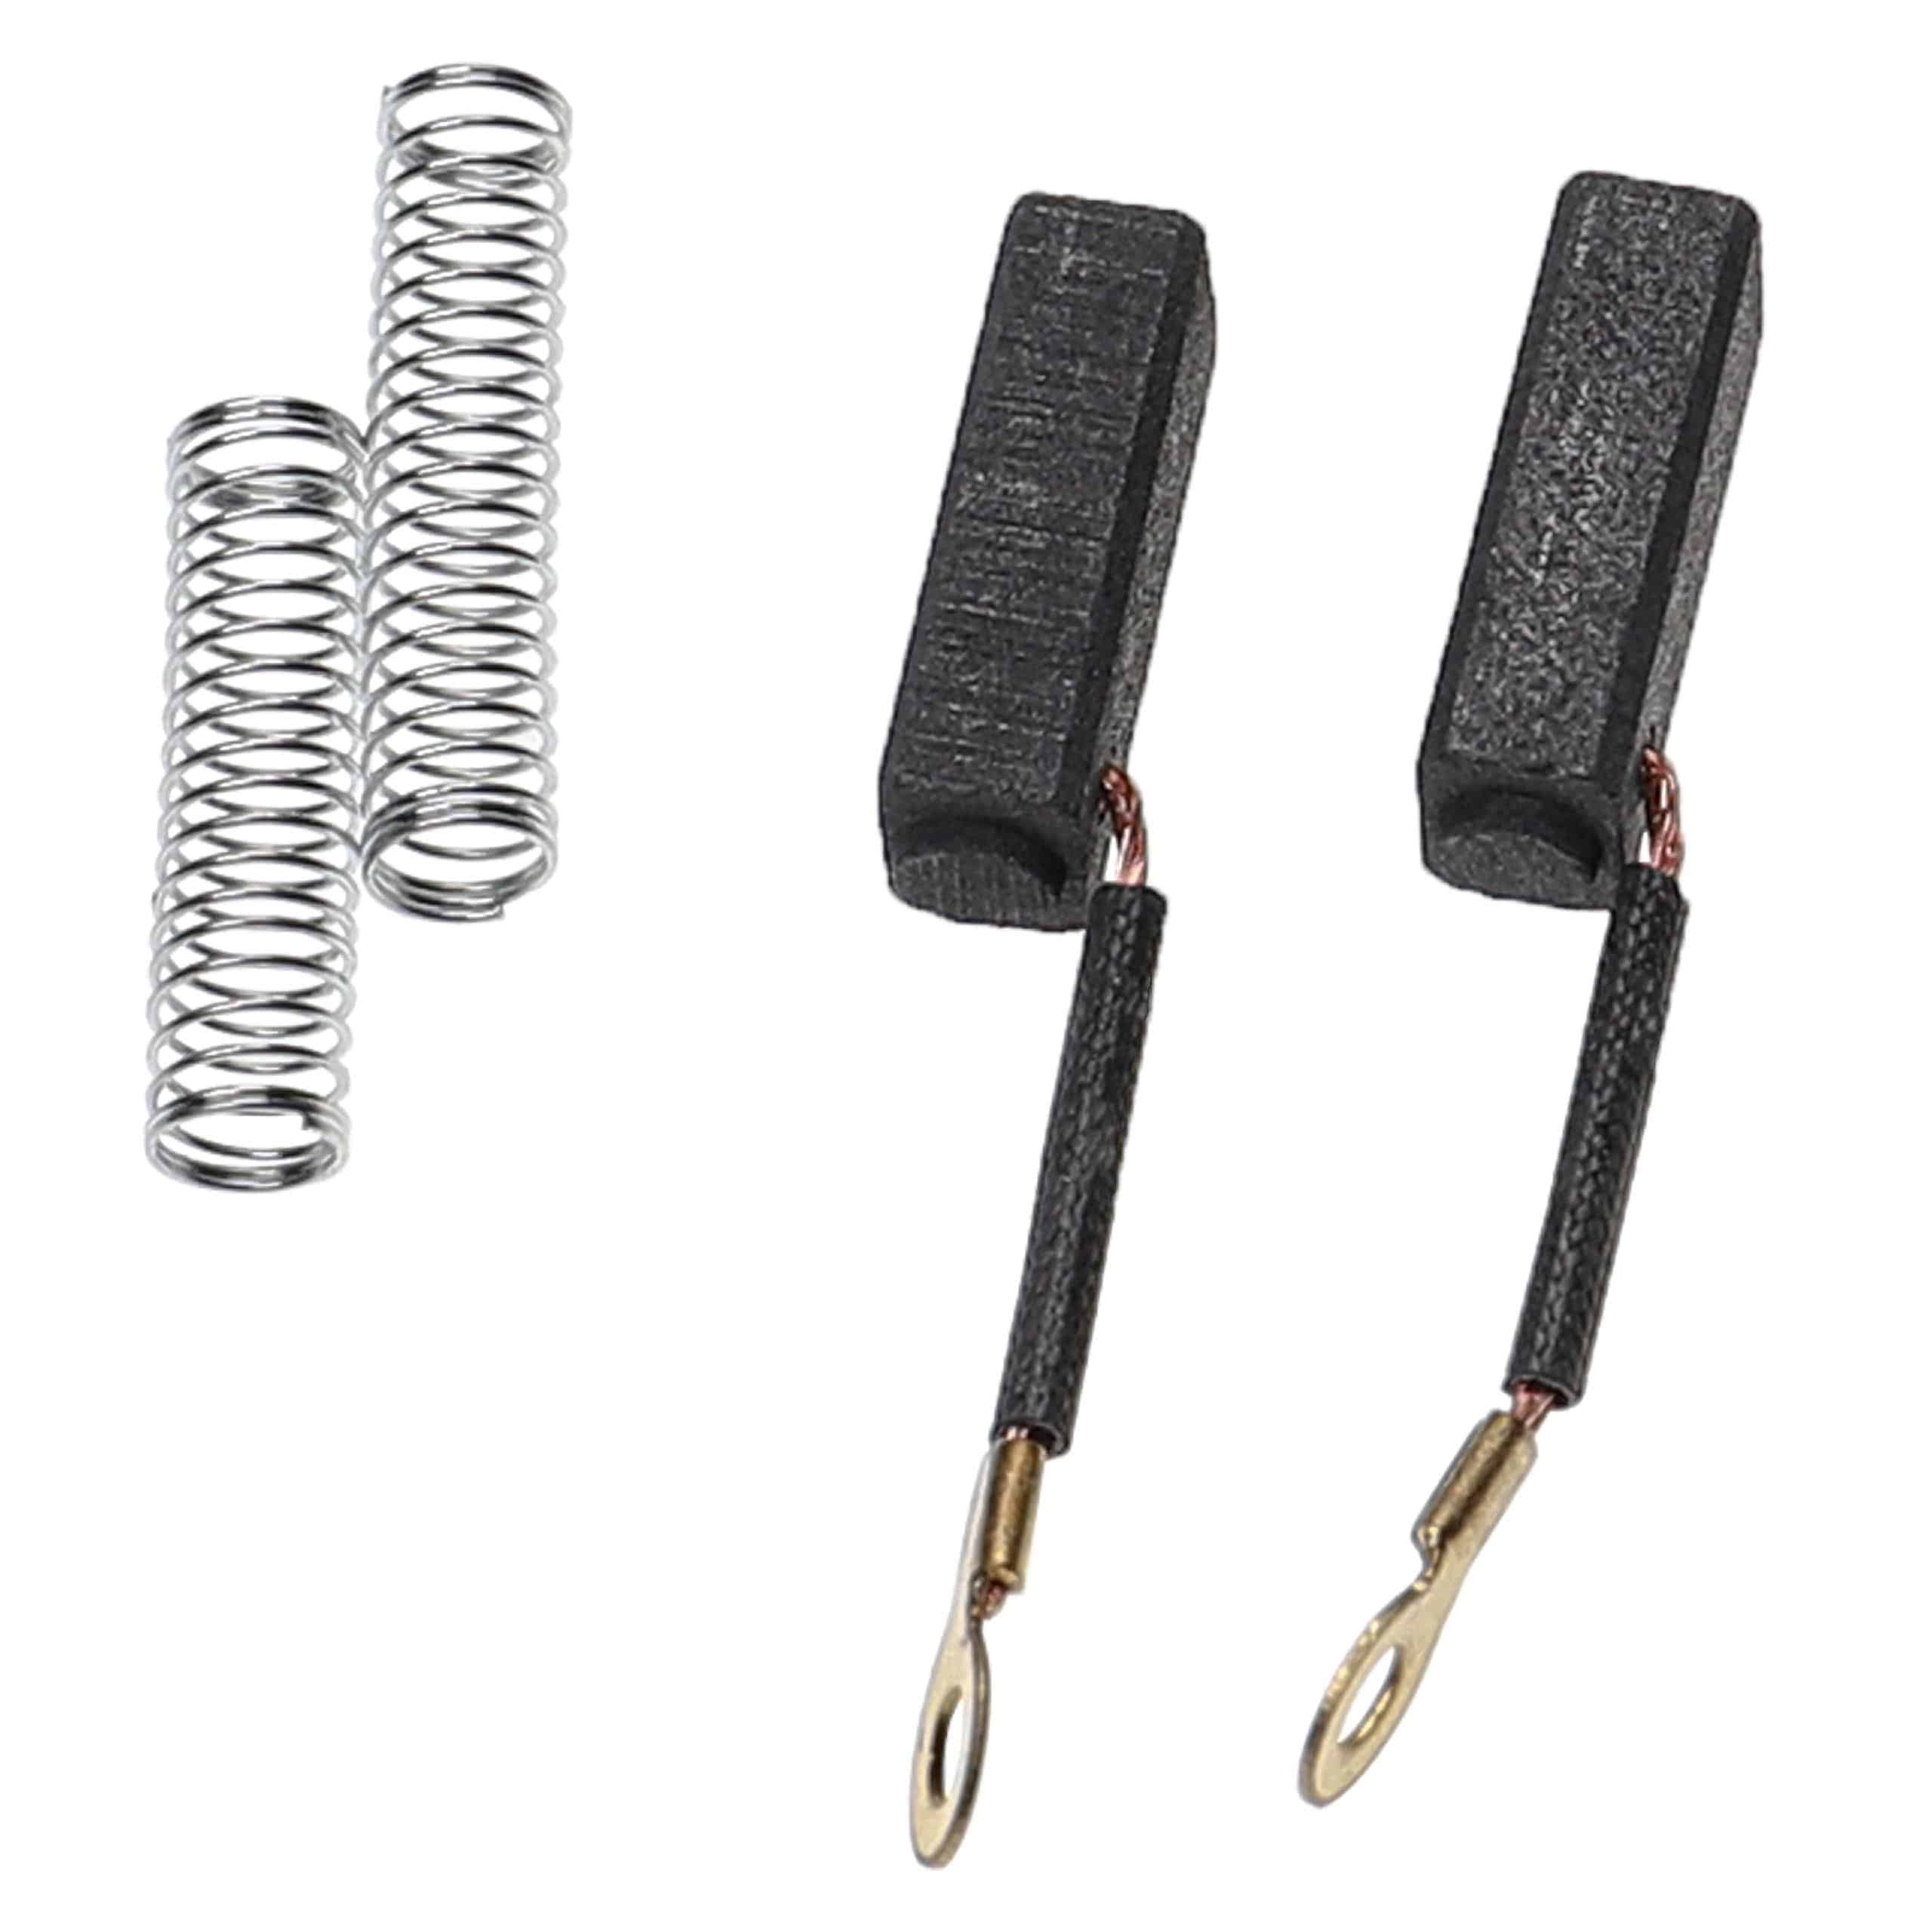 2x Carbon Brush as Replacement for MZ 0816.1-202 Electric Power Tools + Spring, 6 x 8 x 20mm